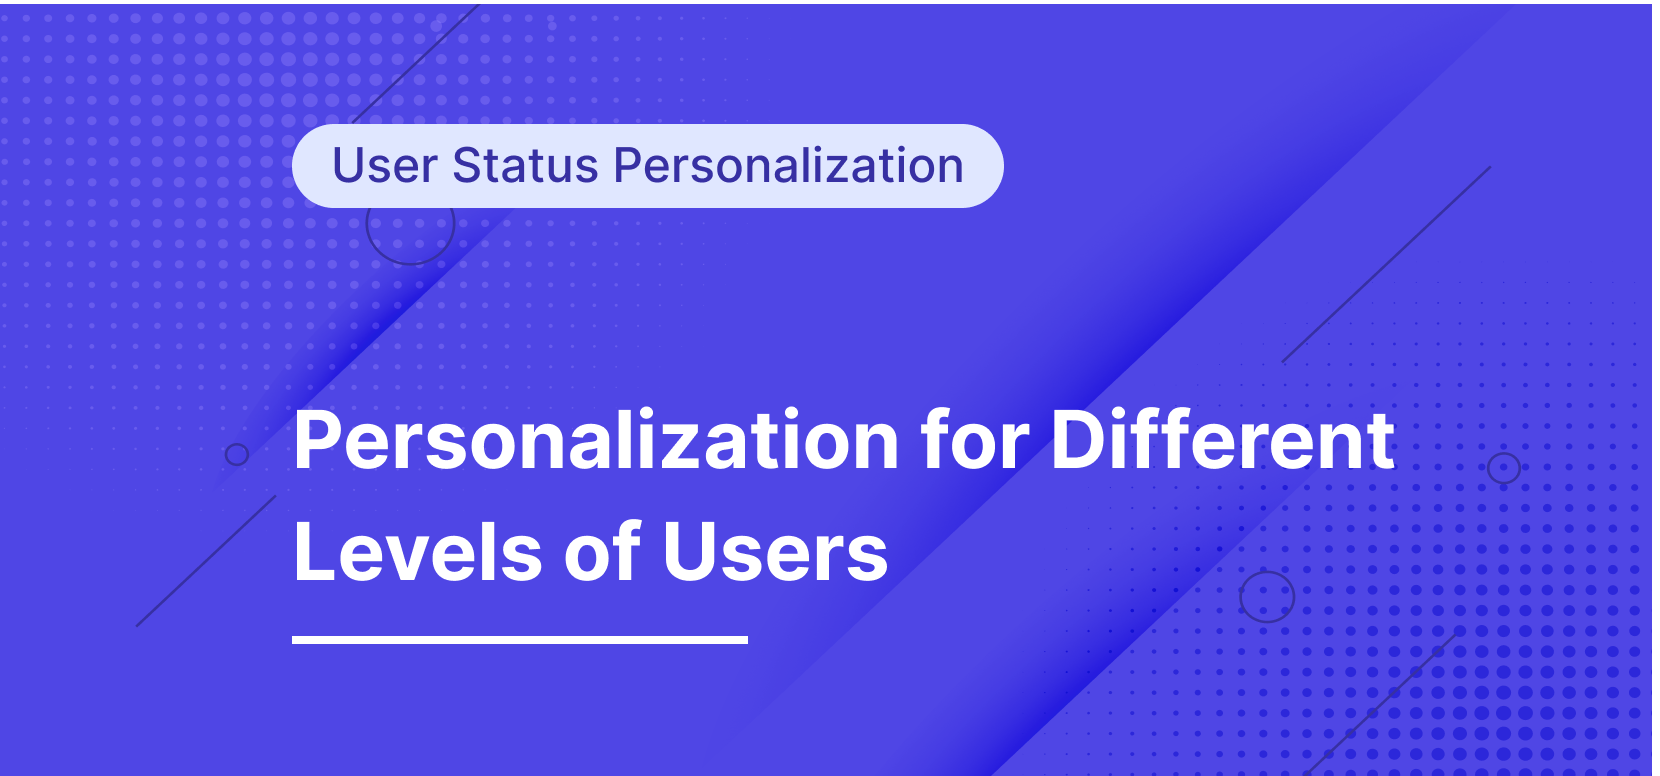 How to Personalize the User Experience for Different Levels of Users